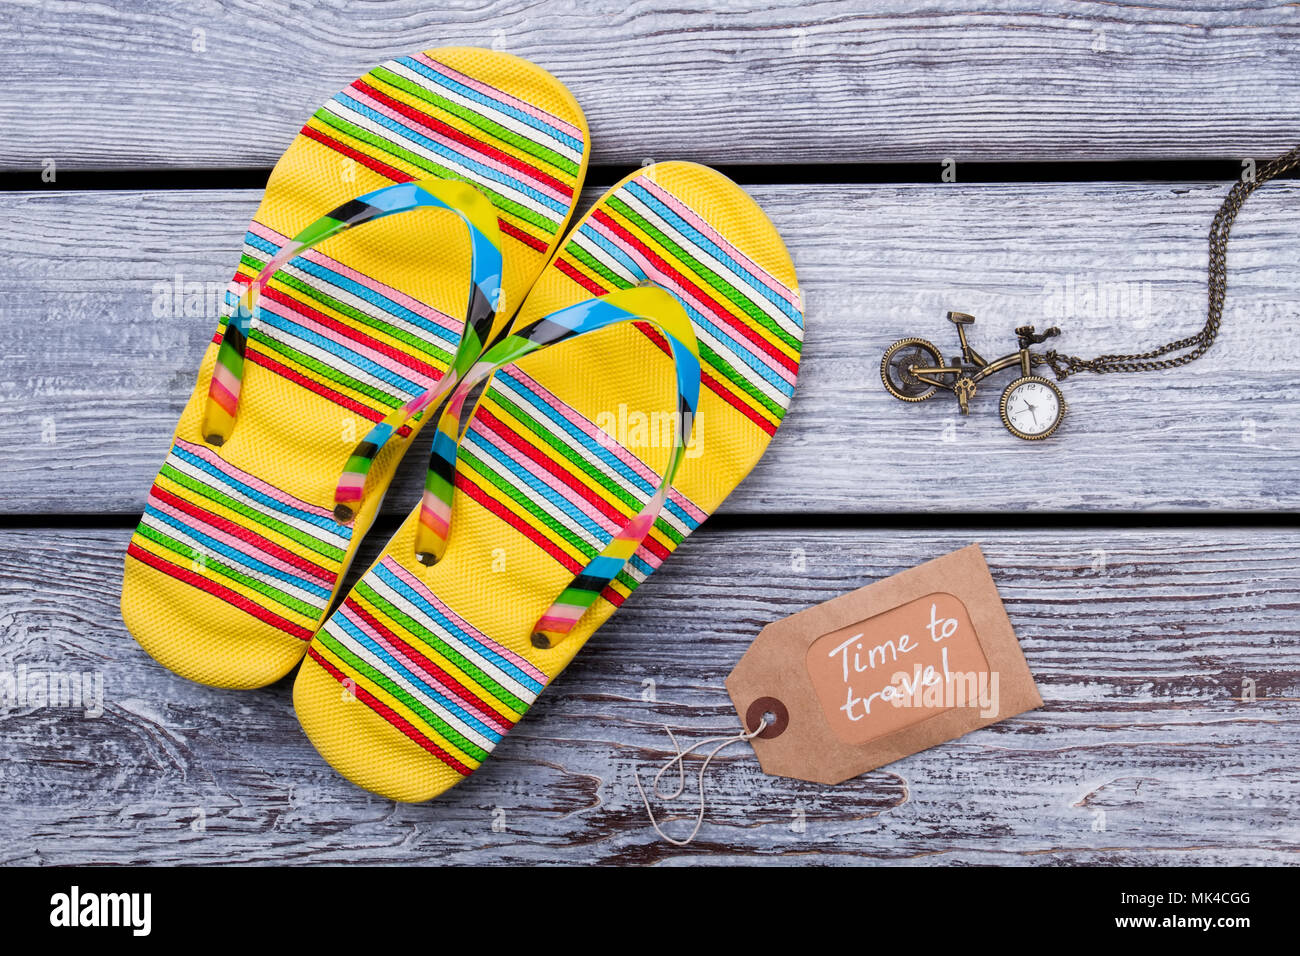 Time To Travel Concept Sandals Flip Flops And Clock On Wooden